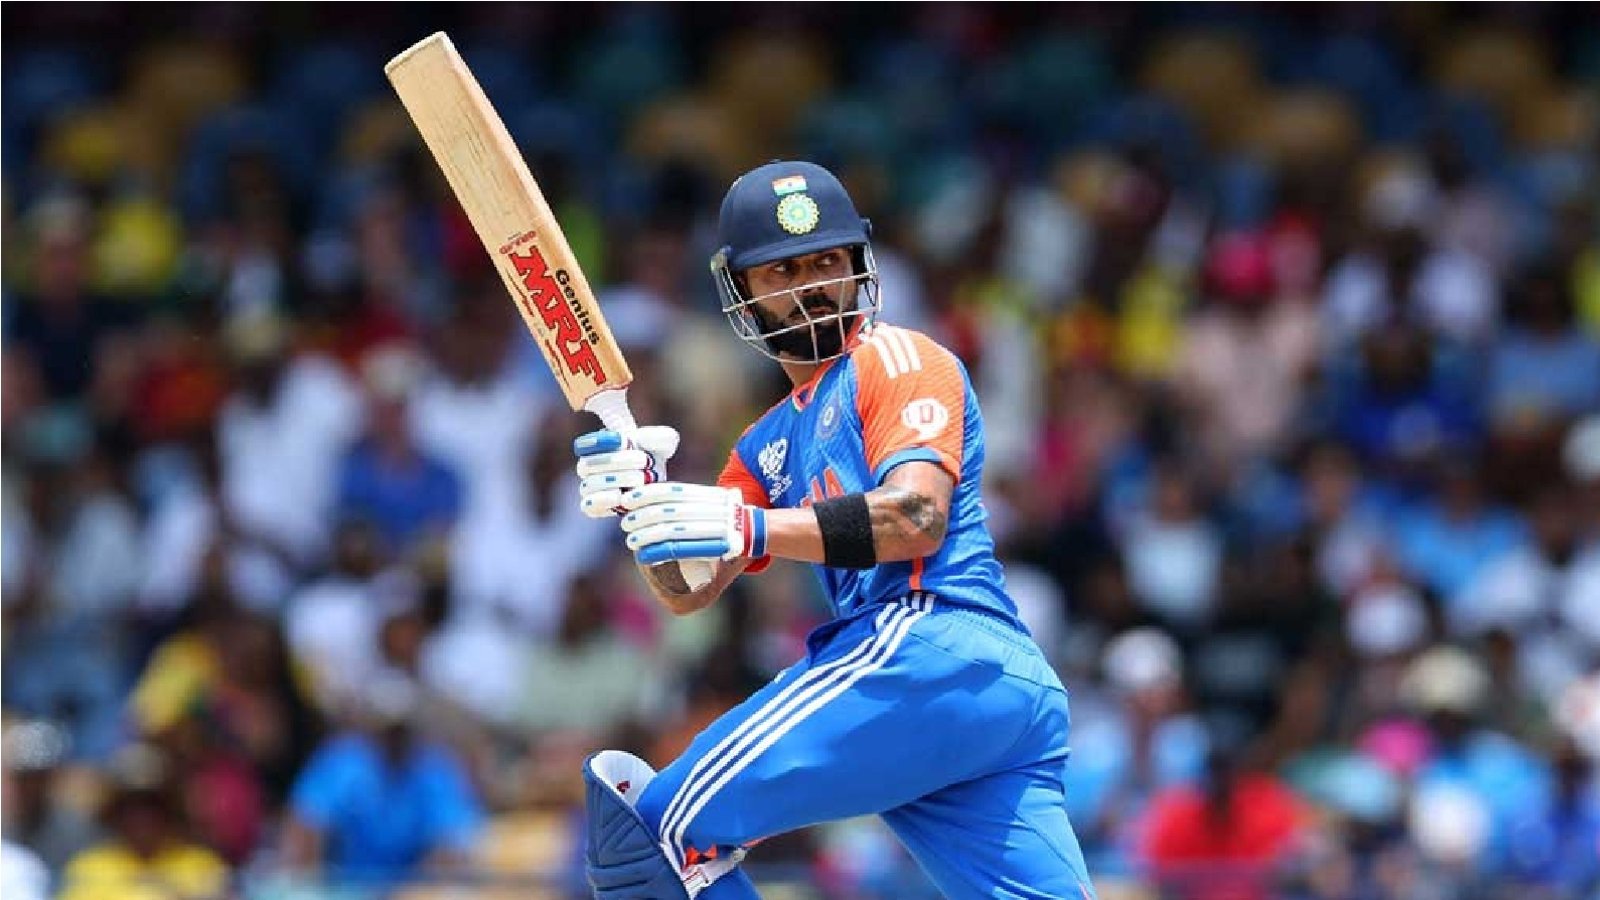 Kohli bows out of T20 internationals in style